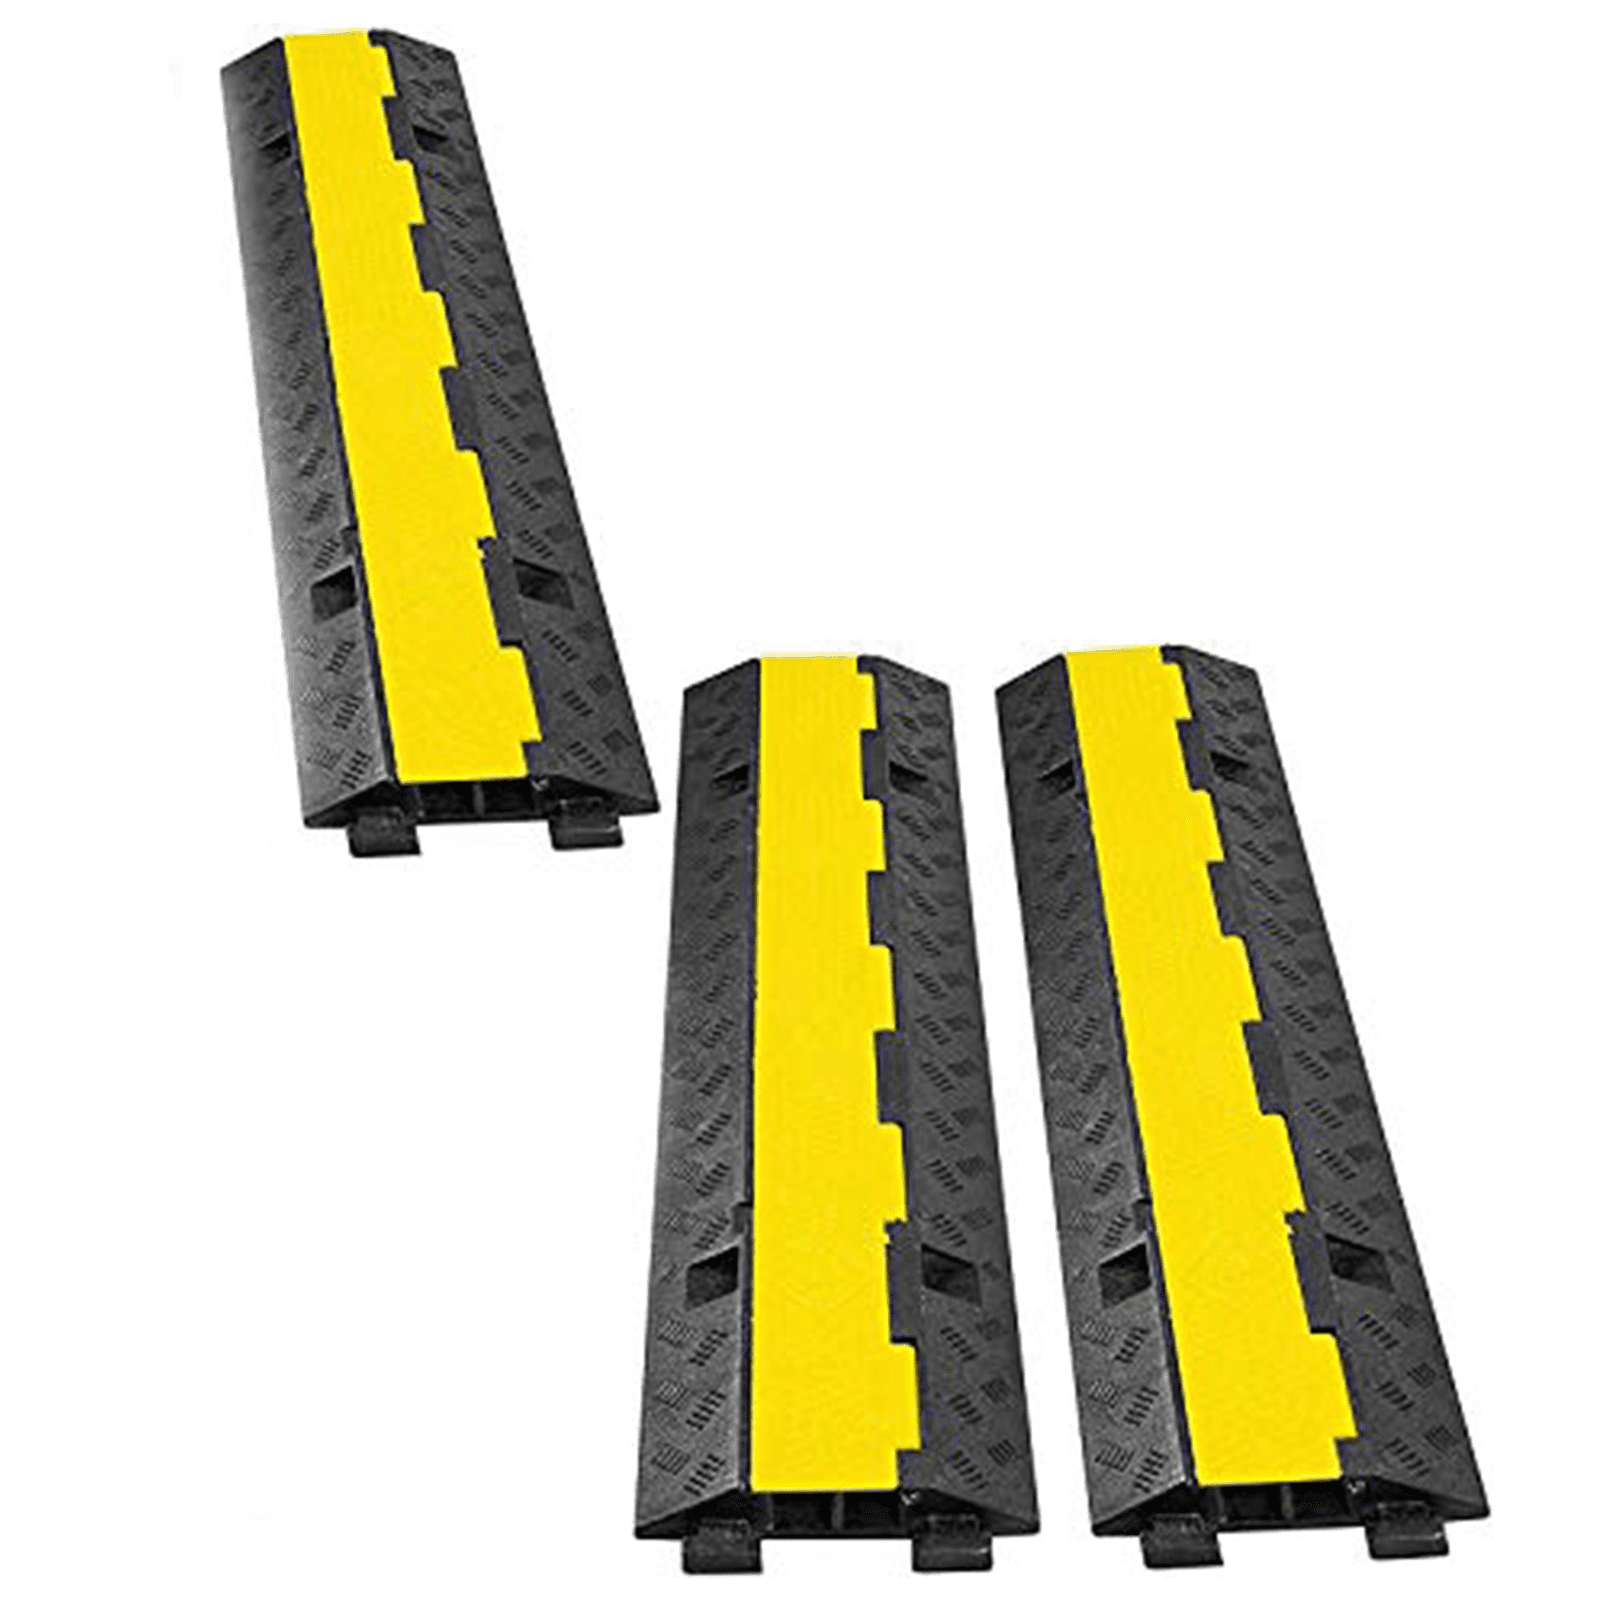 TECSPACE 3 Pack of 2-Channel Traffic Speed Bump Heavy Duty Rubber Cable ...